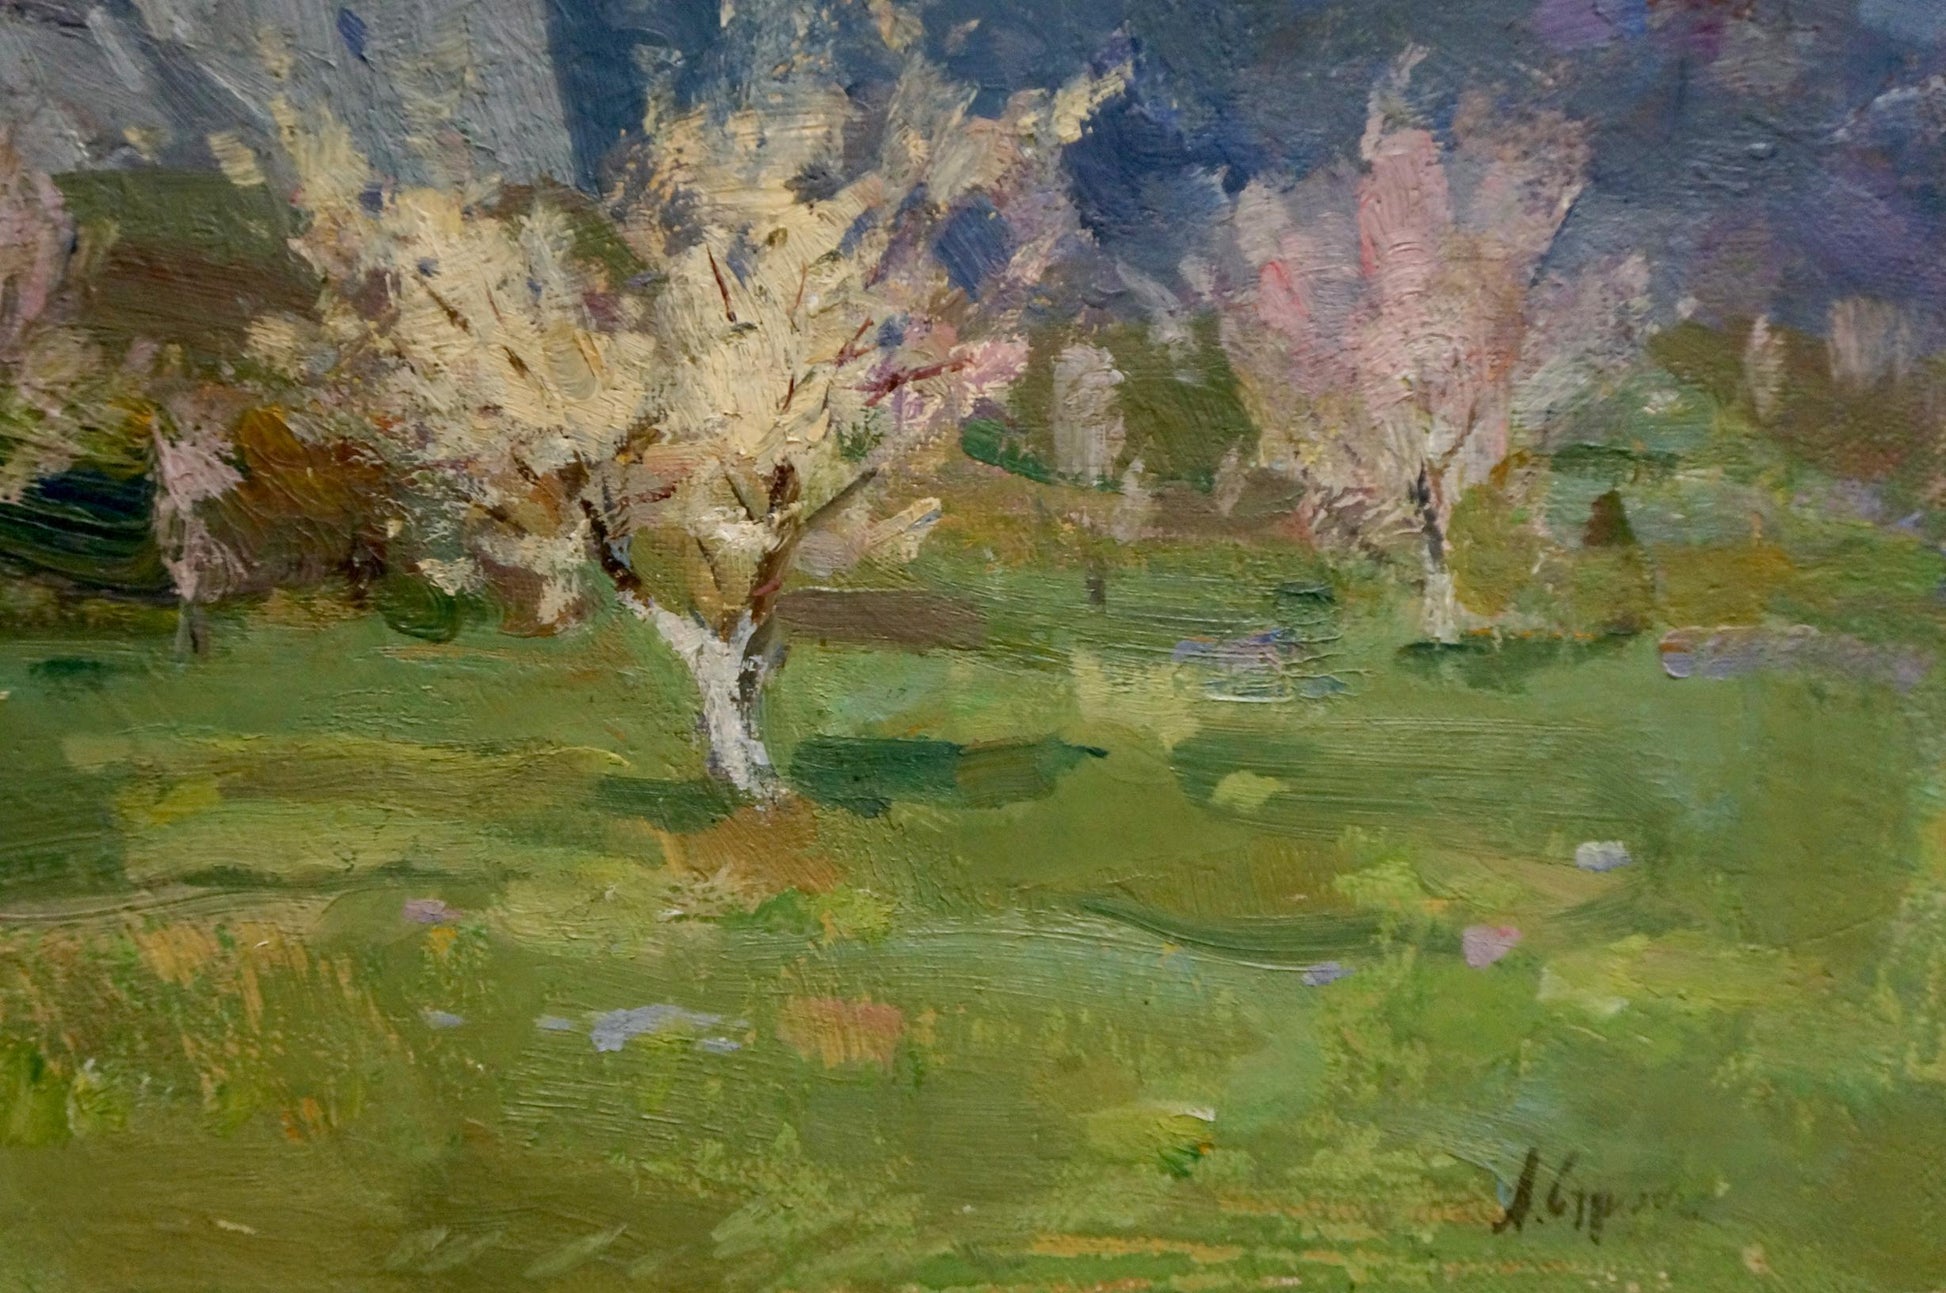 Arkady Efimovich Strelov's oil rendition brings to life the blossoming trees